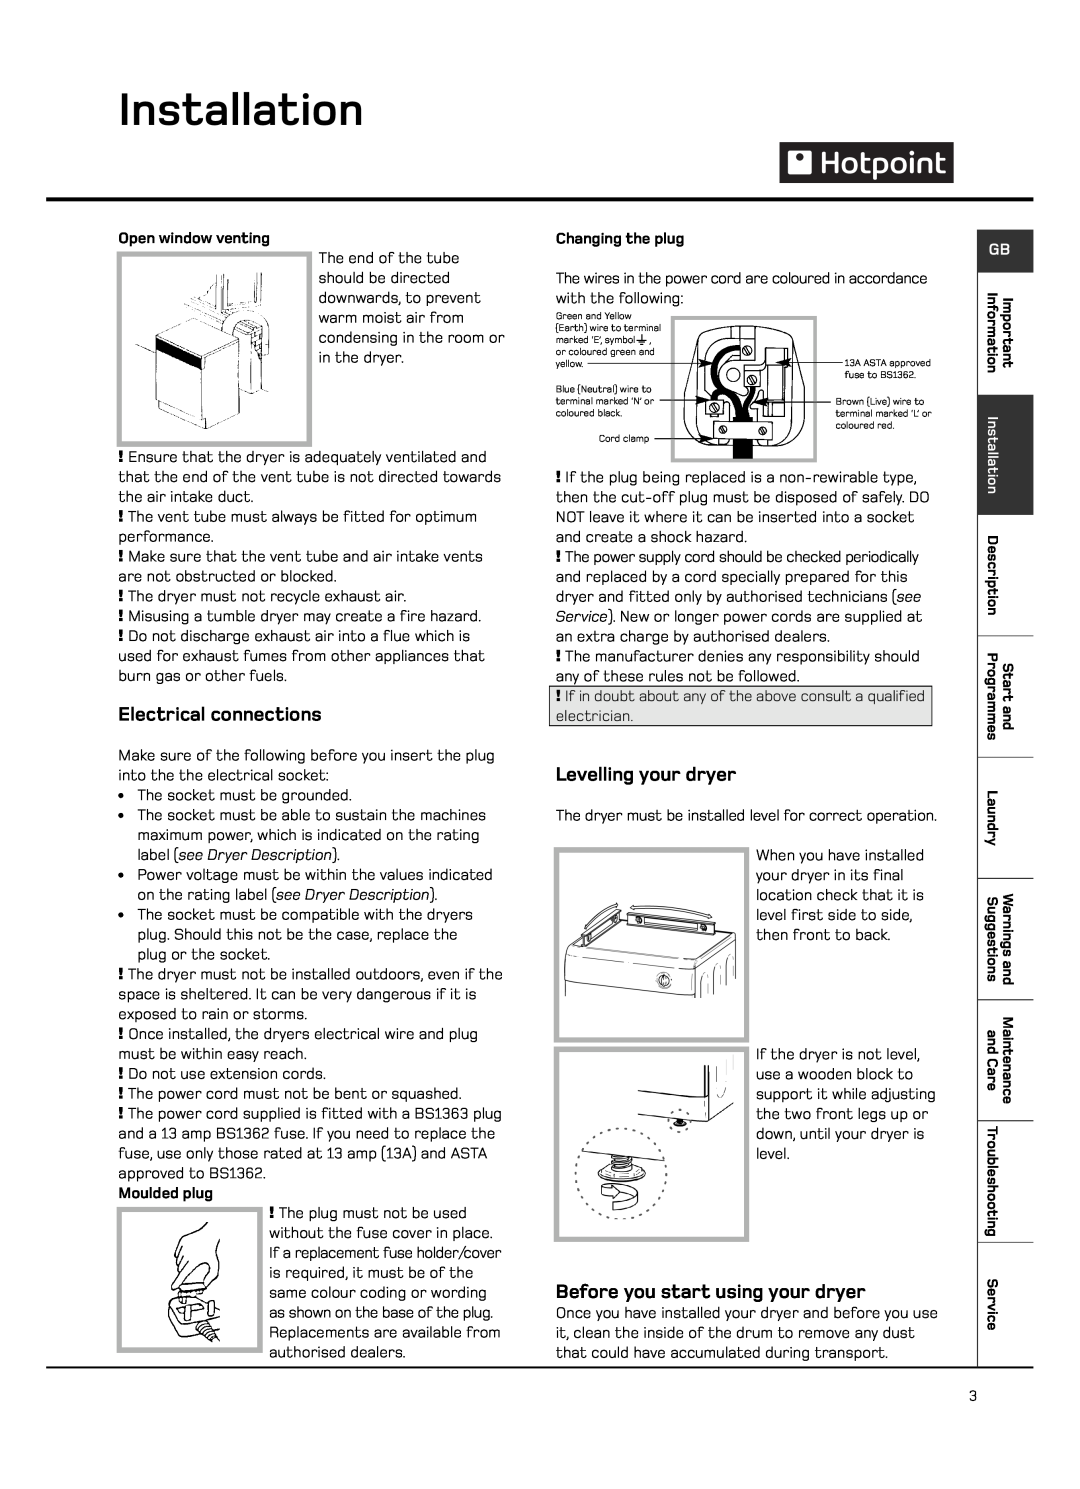 Hotpoint VTD65 Installation, Electrical connections, Levelling your dryer, Before you start using your dryer, Moulded plug 